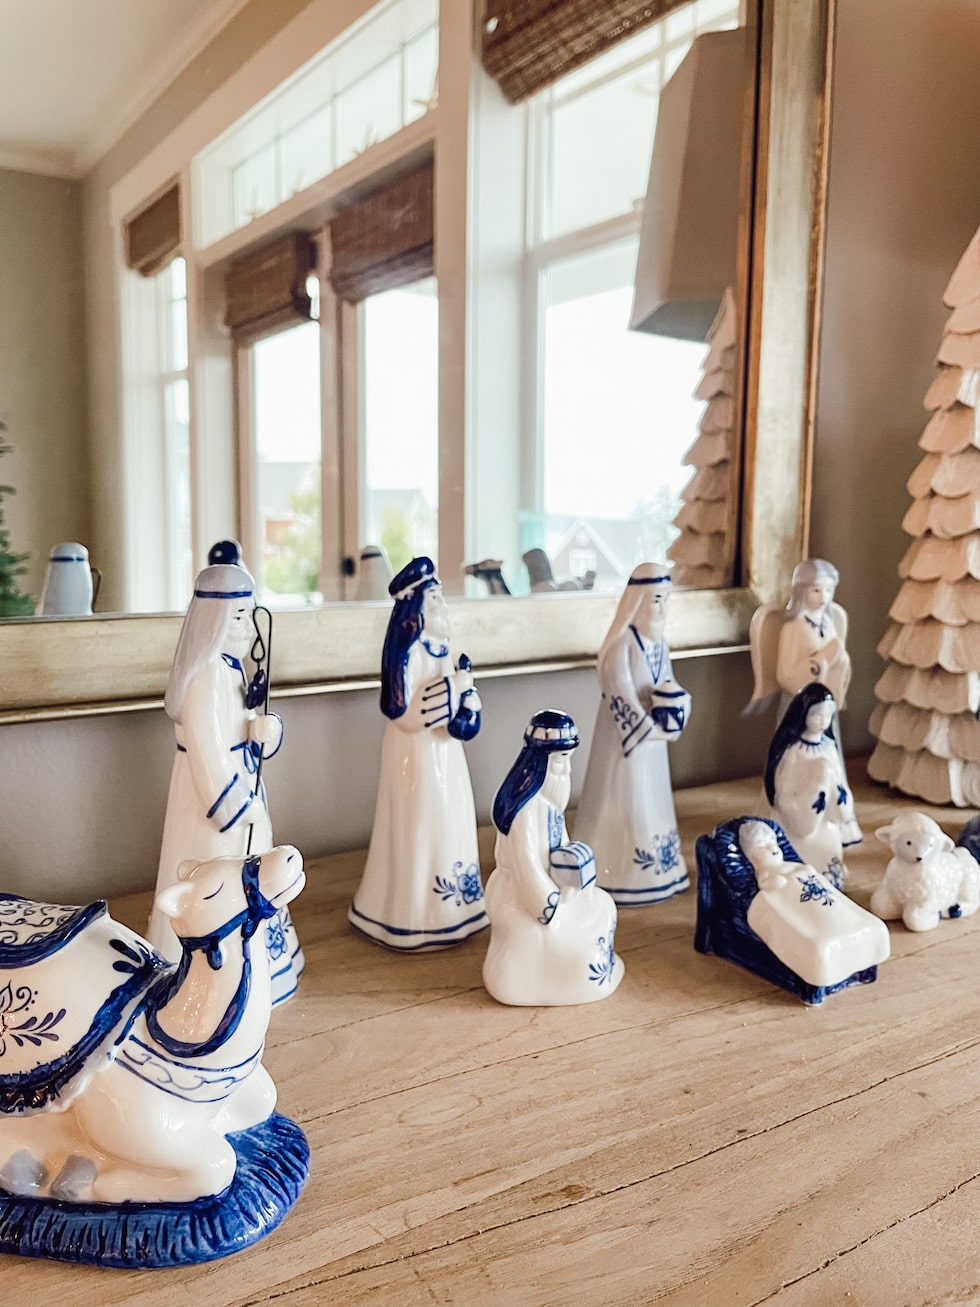 Meaningful Christmas: Our Blue and White Nativity Set